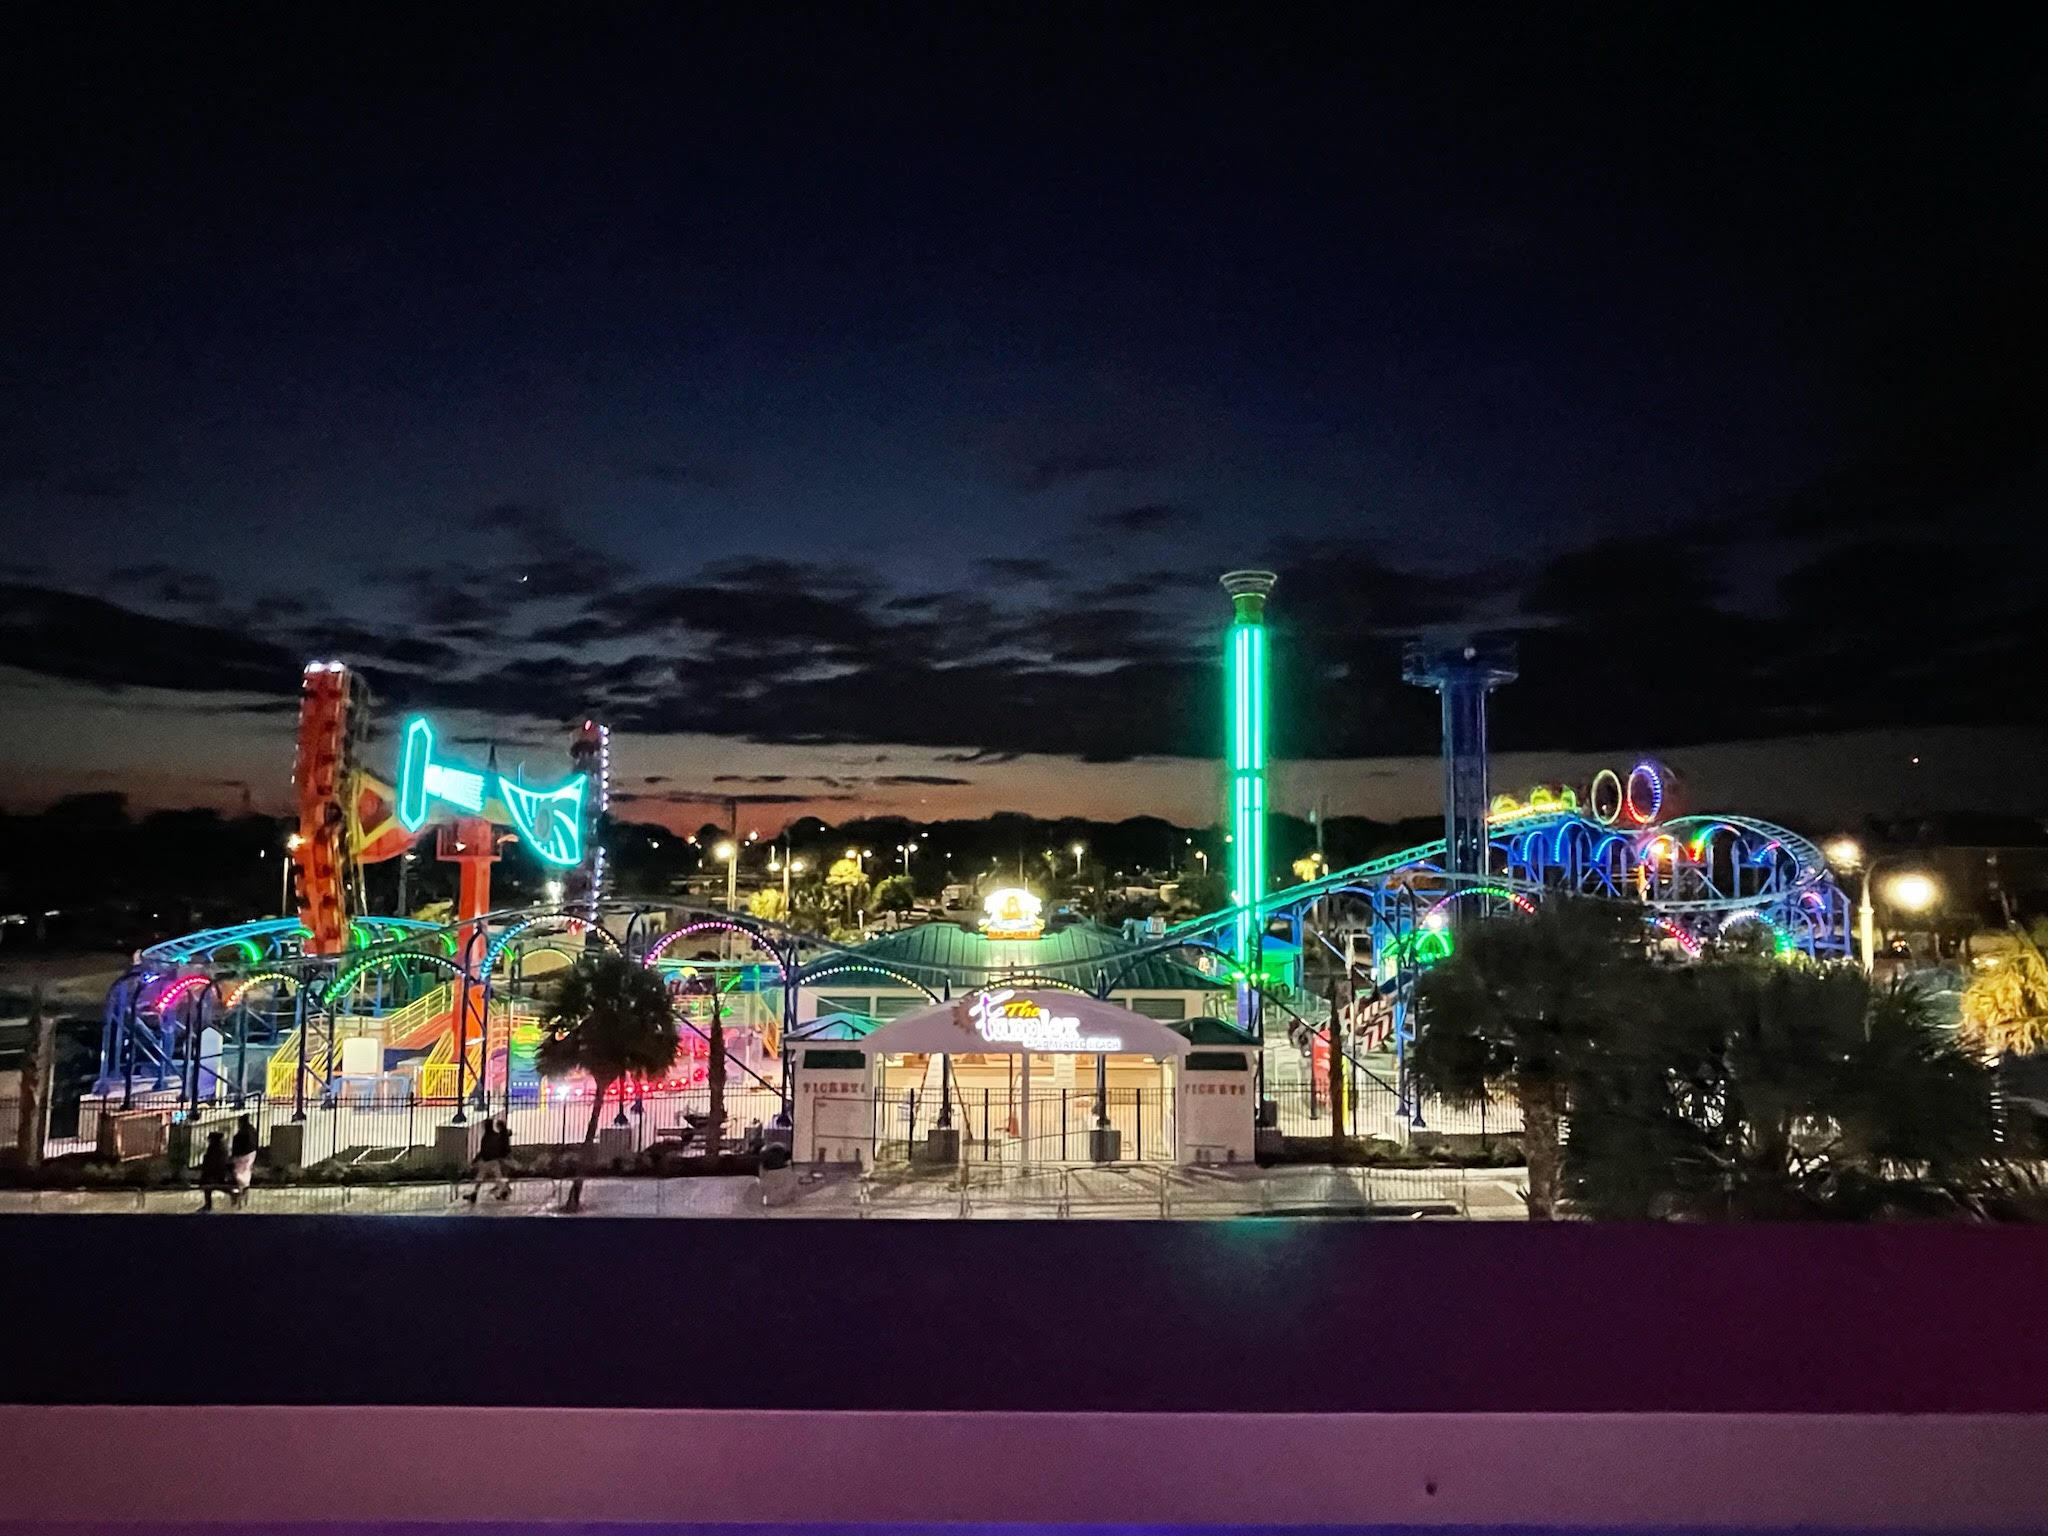 amusement park all lit up at night at Myrtle Beach